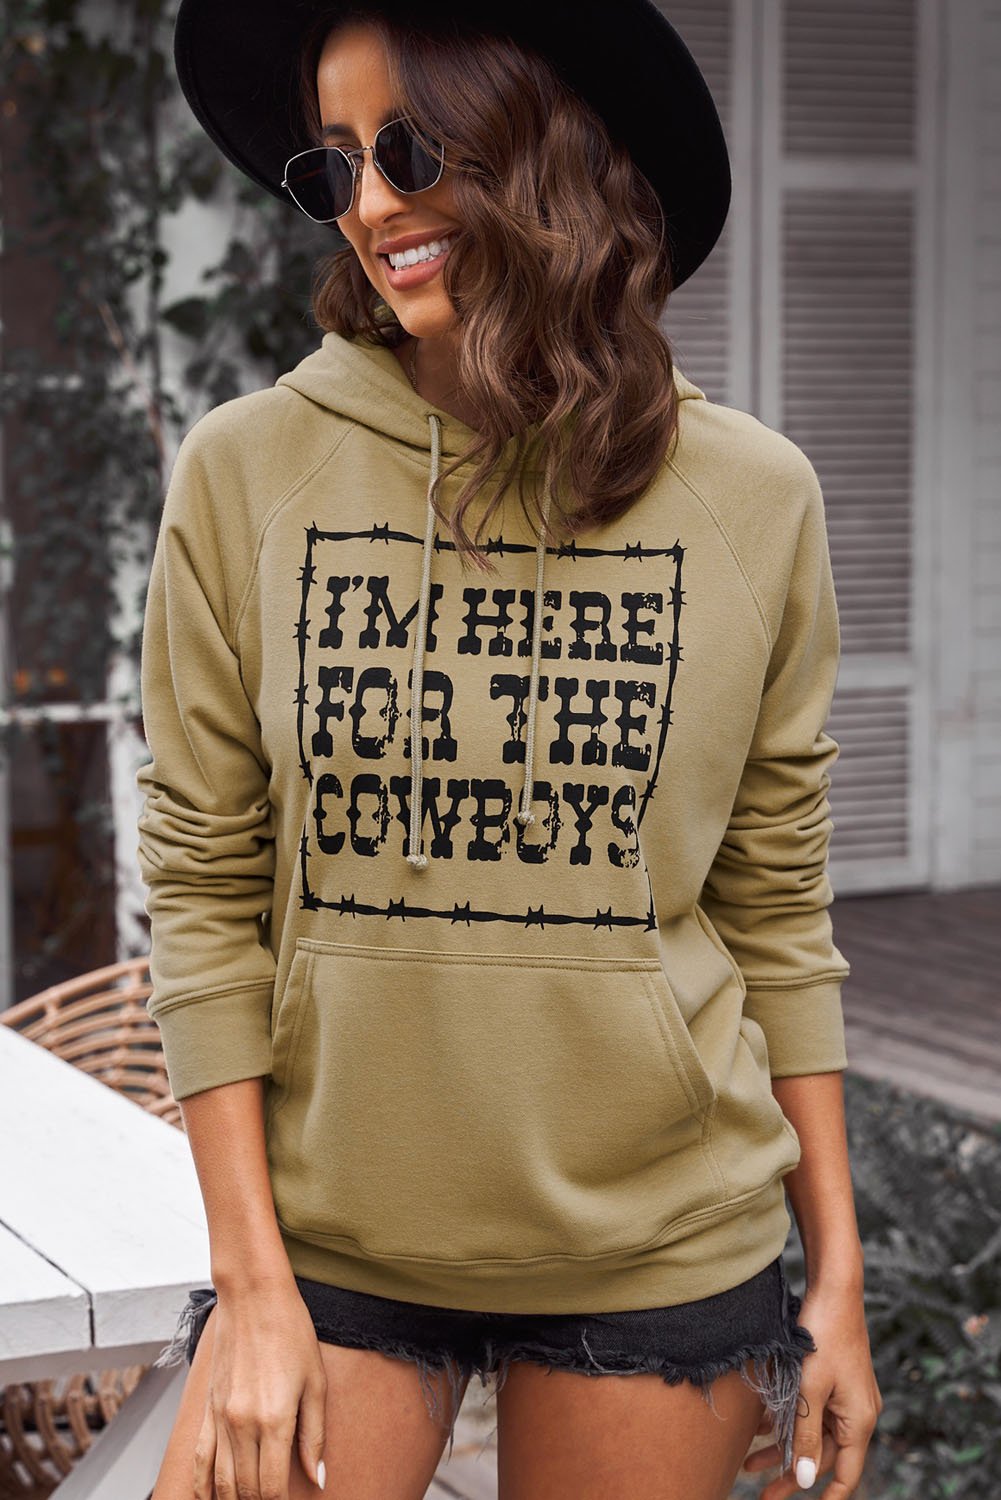 "Love in Comfort - Embrace Romance with our Letter Graphic Hoodie and Kangaroo Pocket - Experience Ultimate Coziness" - Guy Christopher